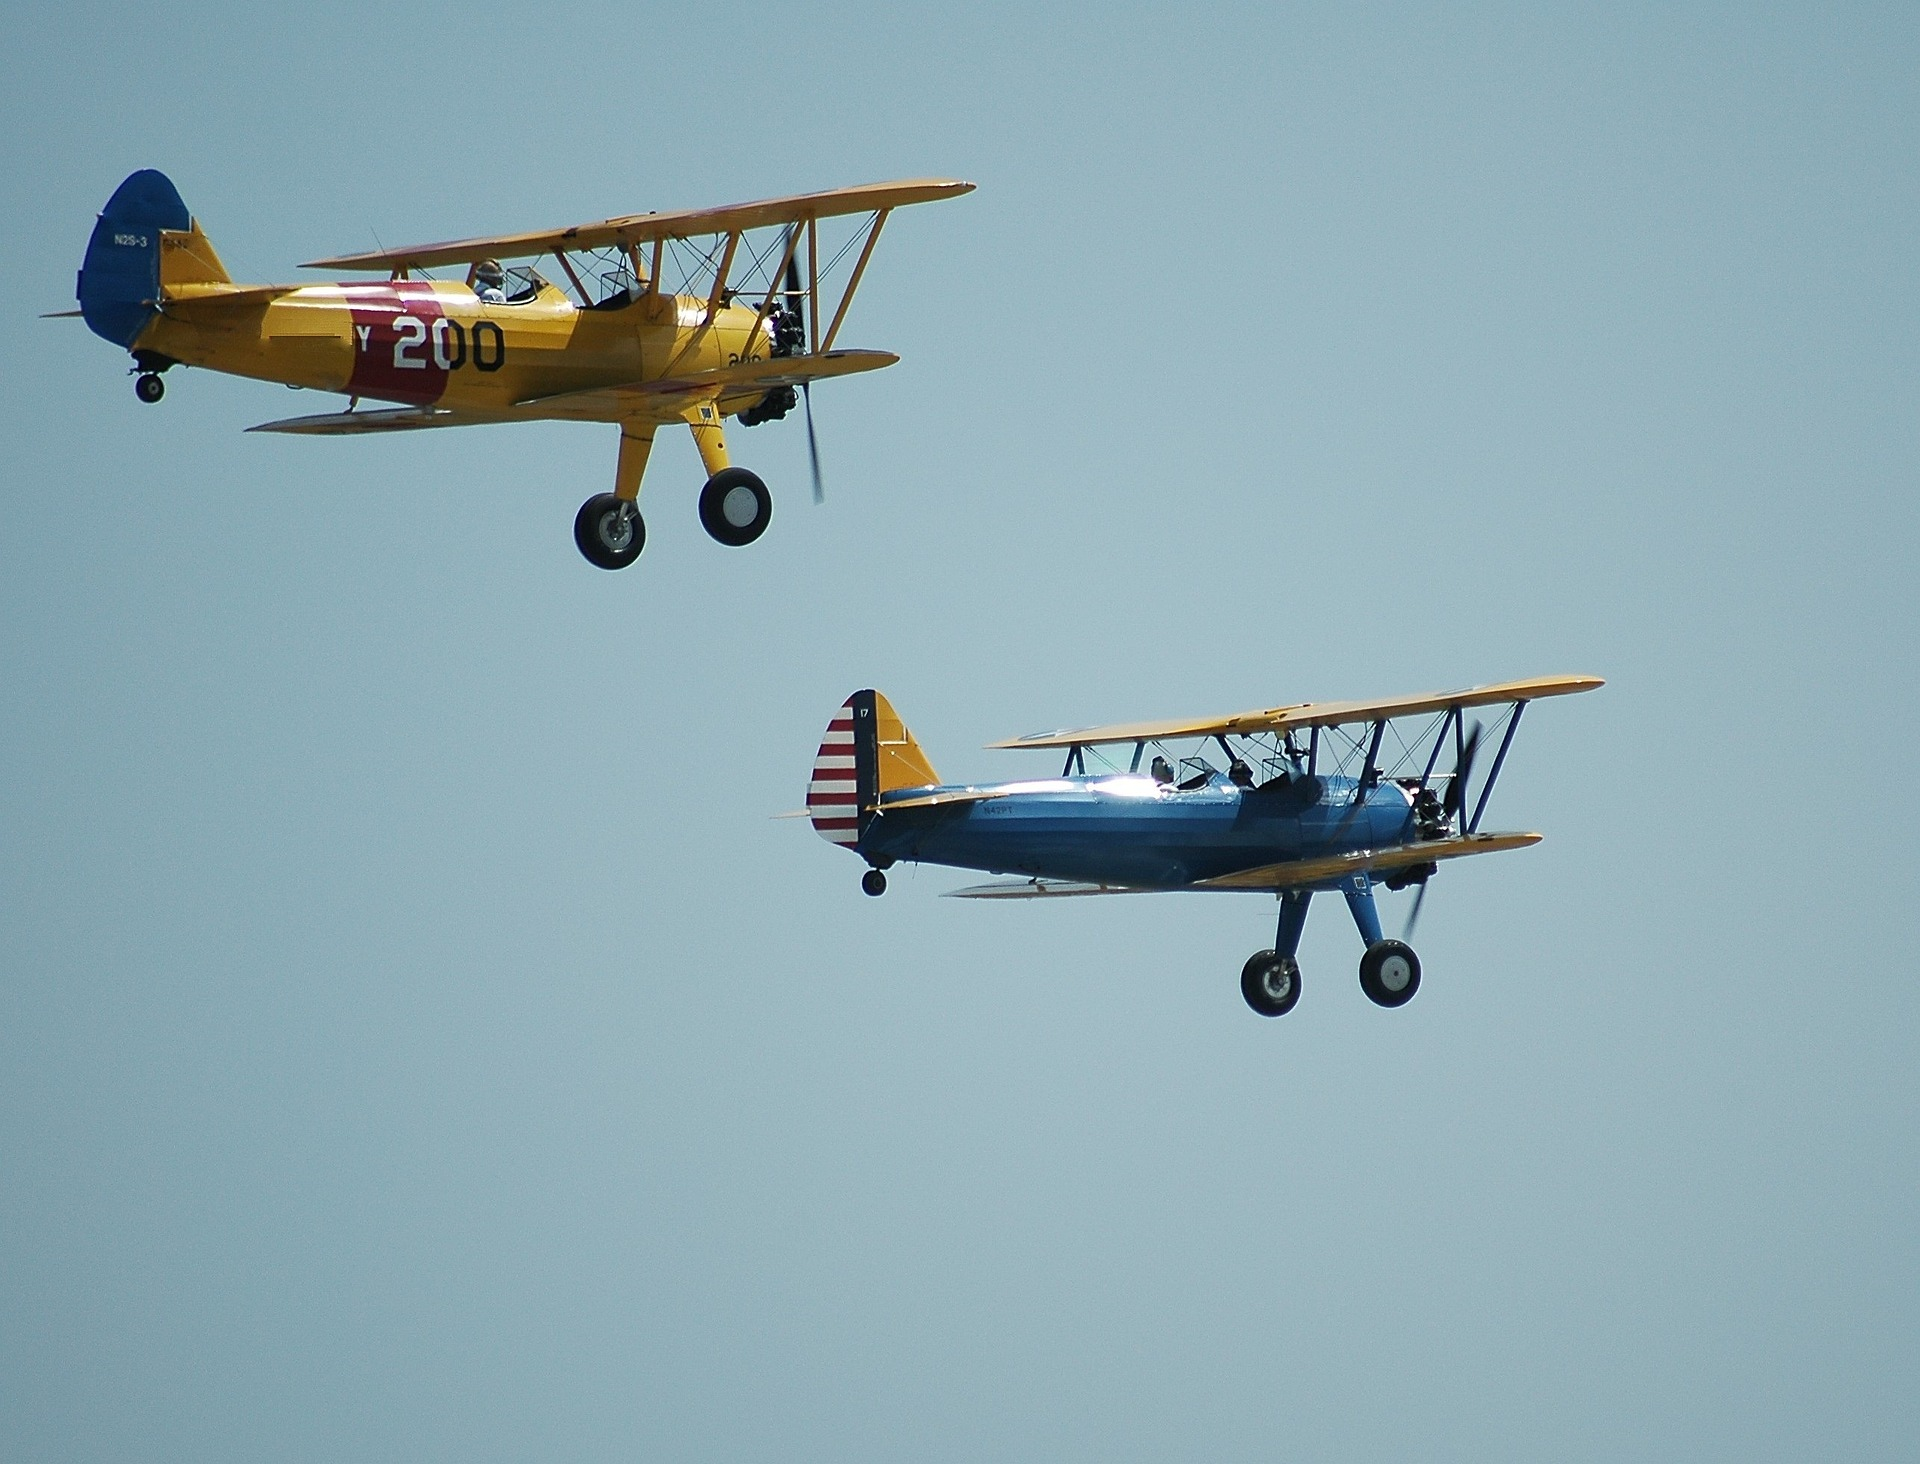 Two planes flying in an air show. 